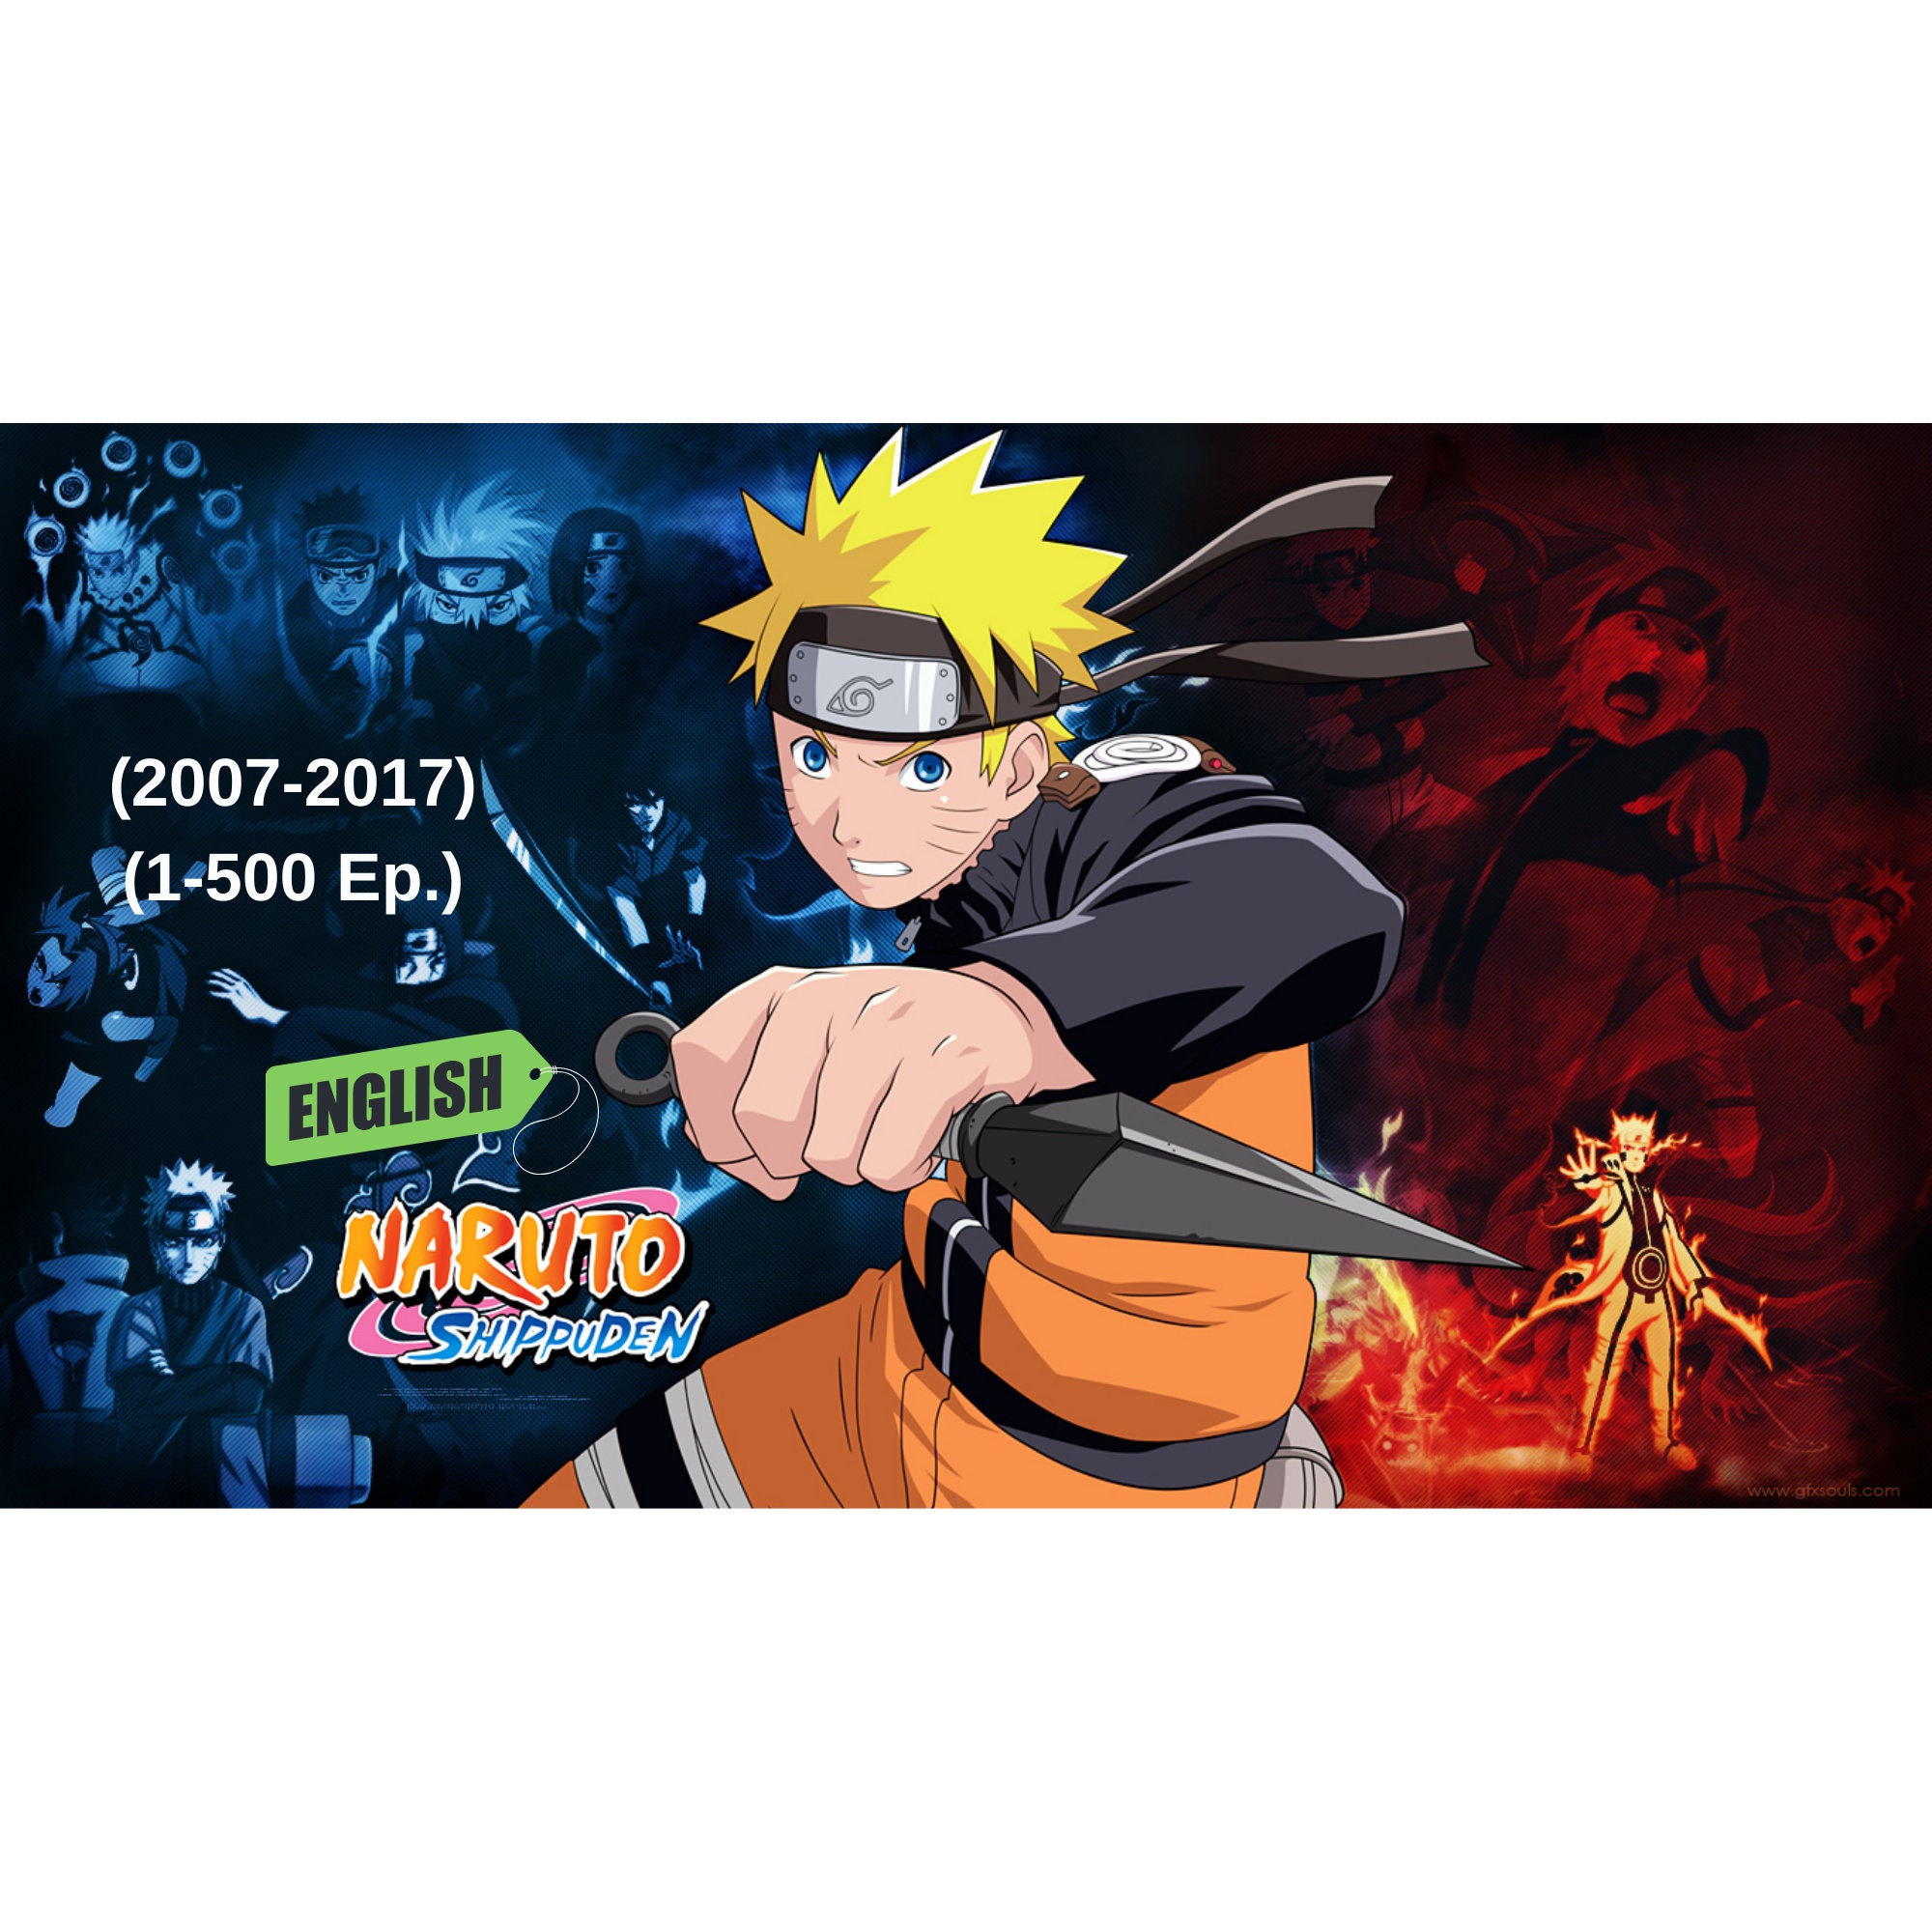 English Dubbed Naruto Shippuden Complete Series DVD Ep 1-720 End FAST SHIP